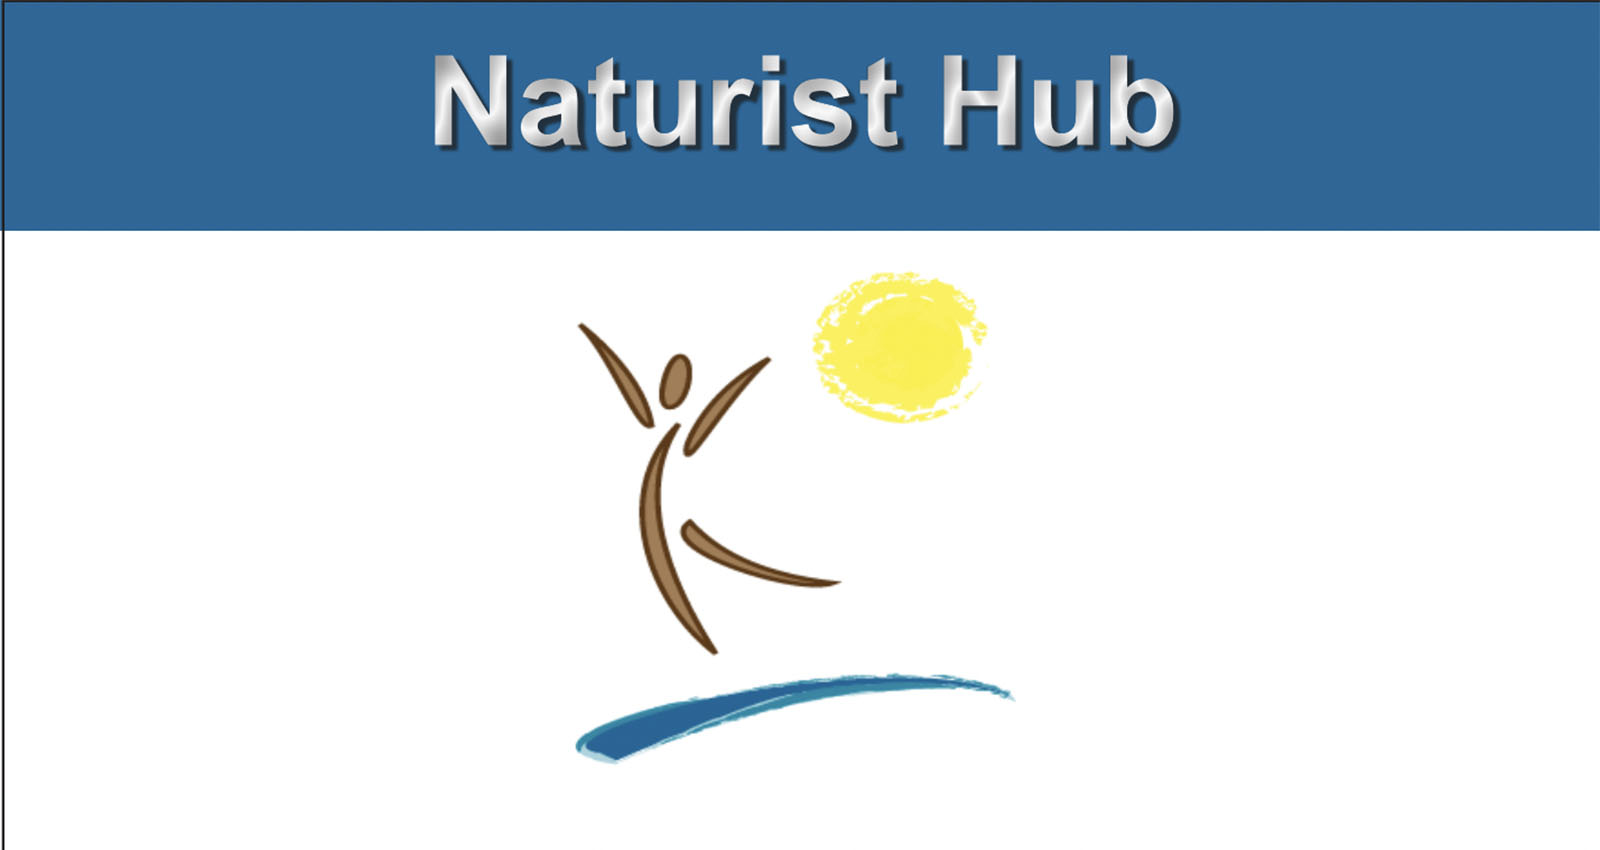 Naturist Hub - Is it possible to create a genuine online platform for naturists?